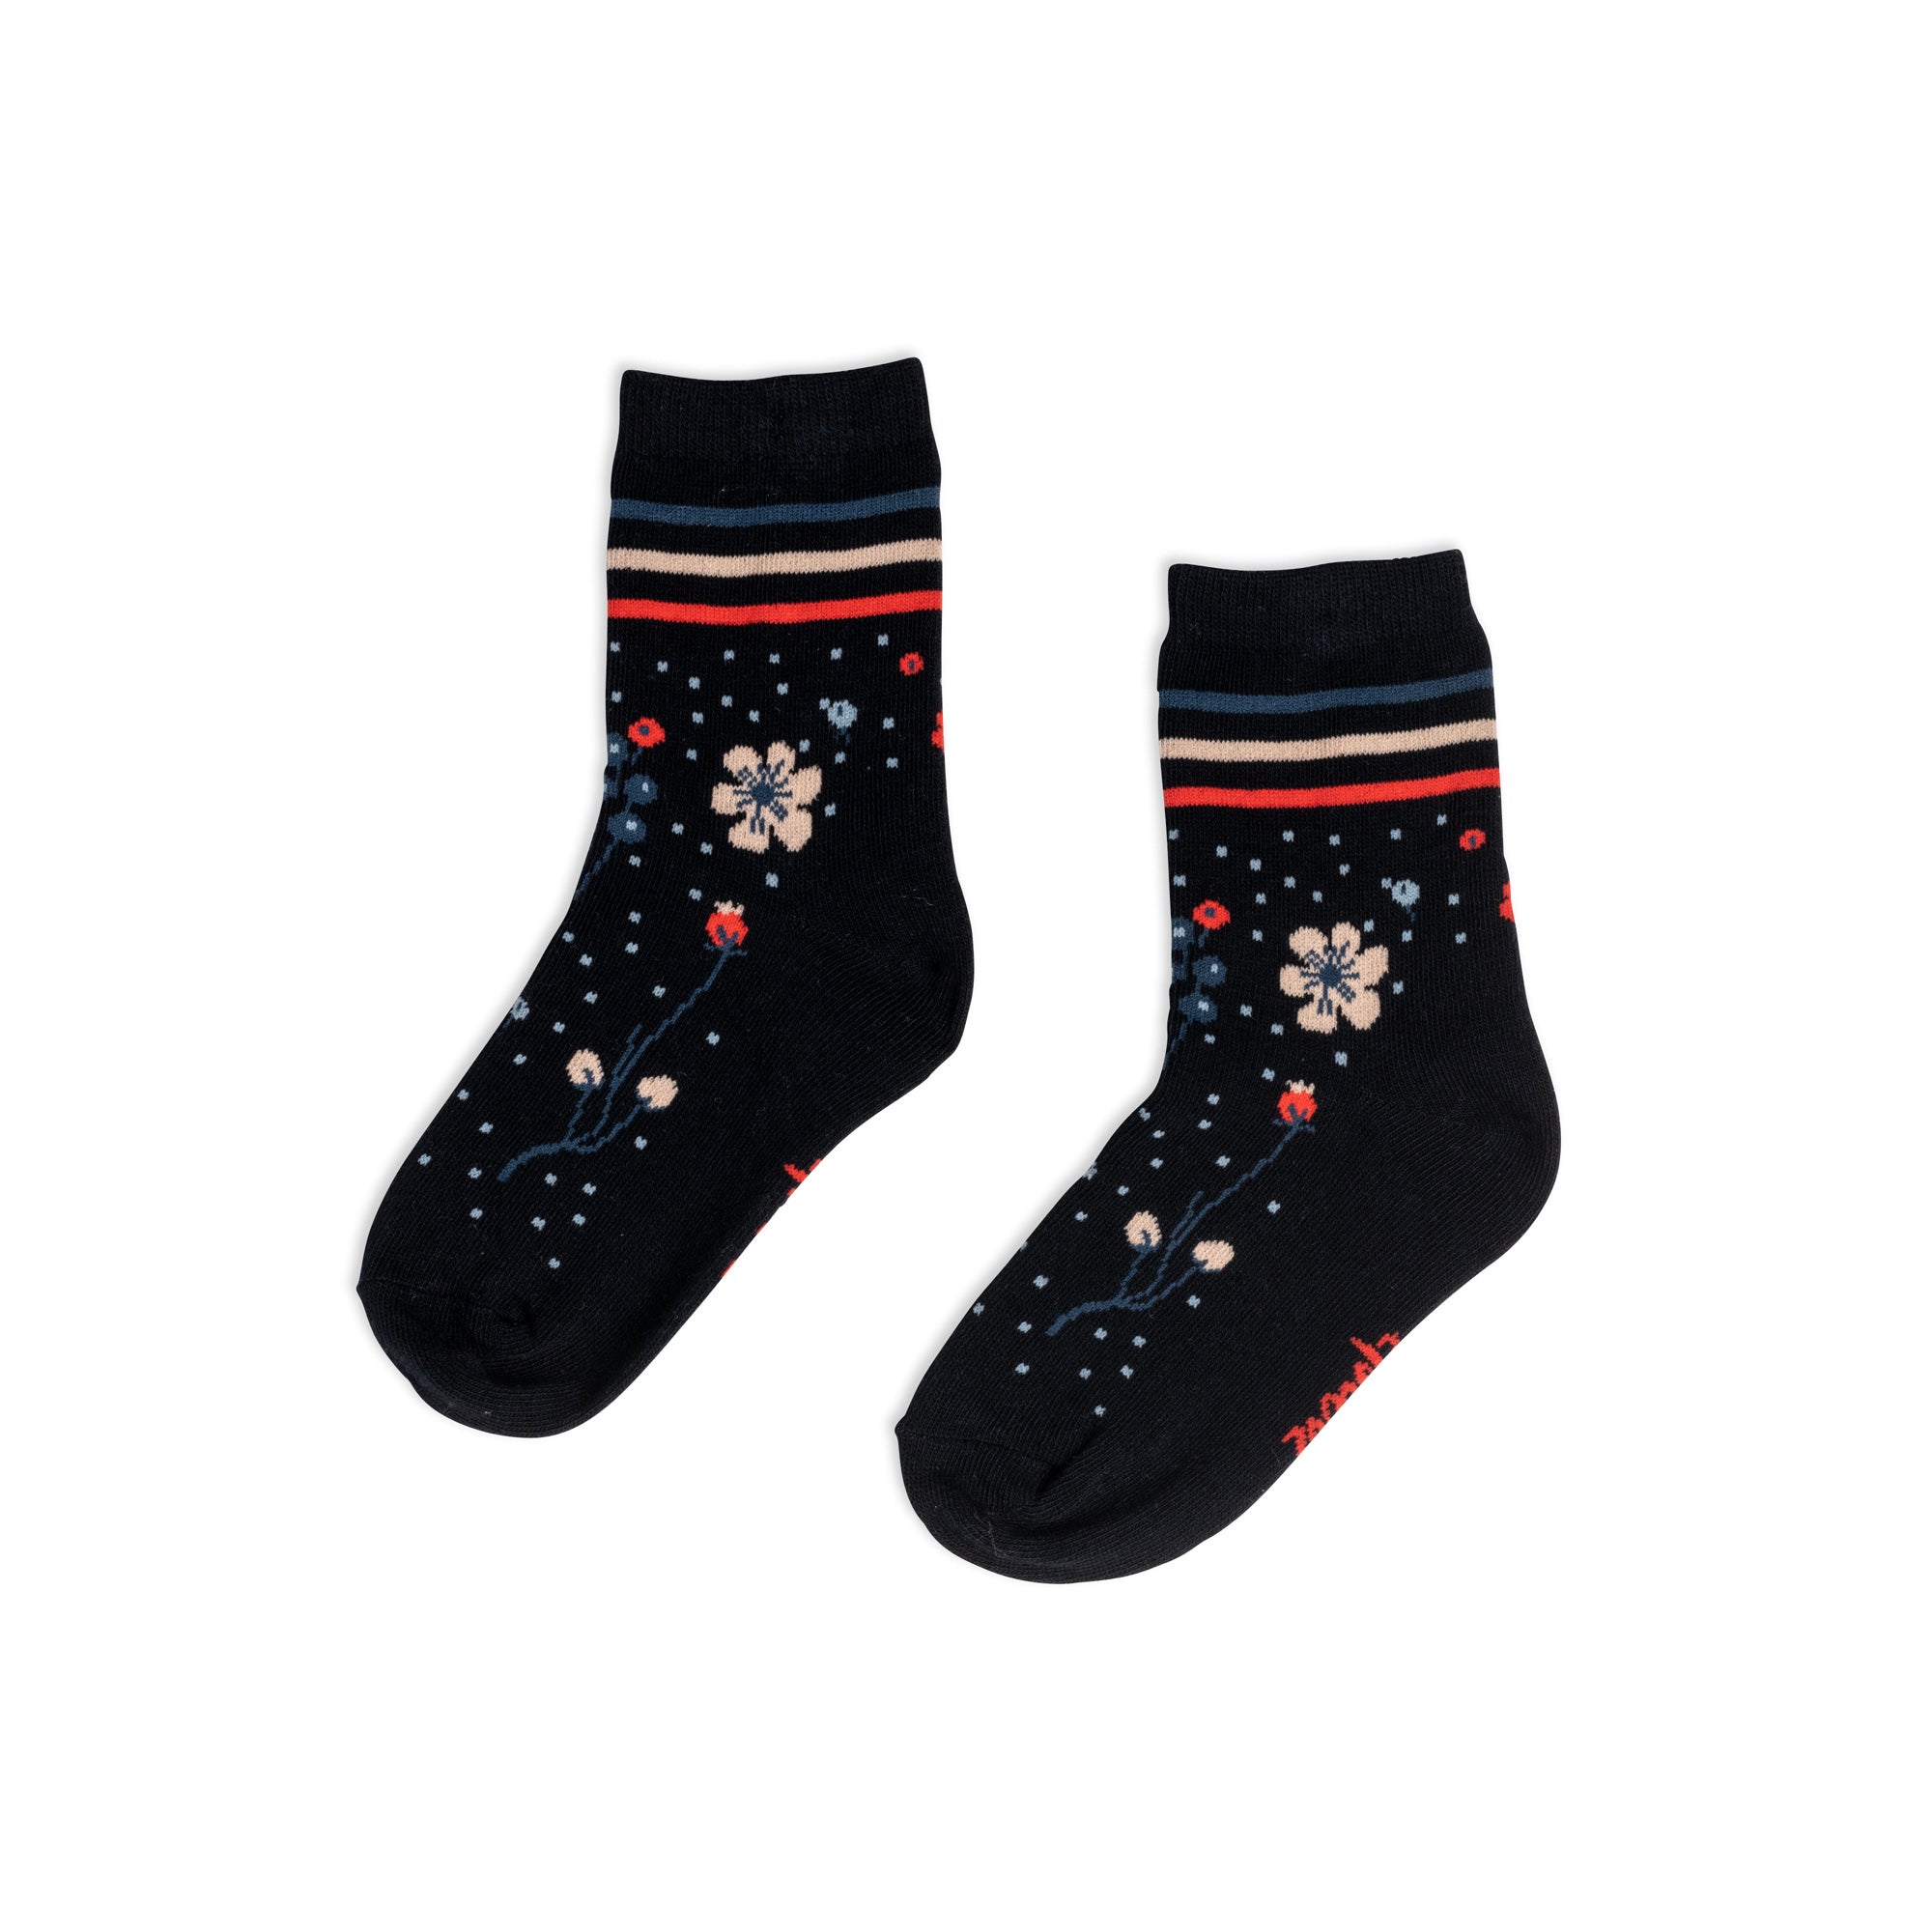 Printed Socks With Flowers And Stripes